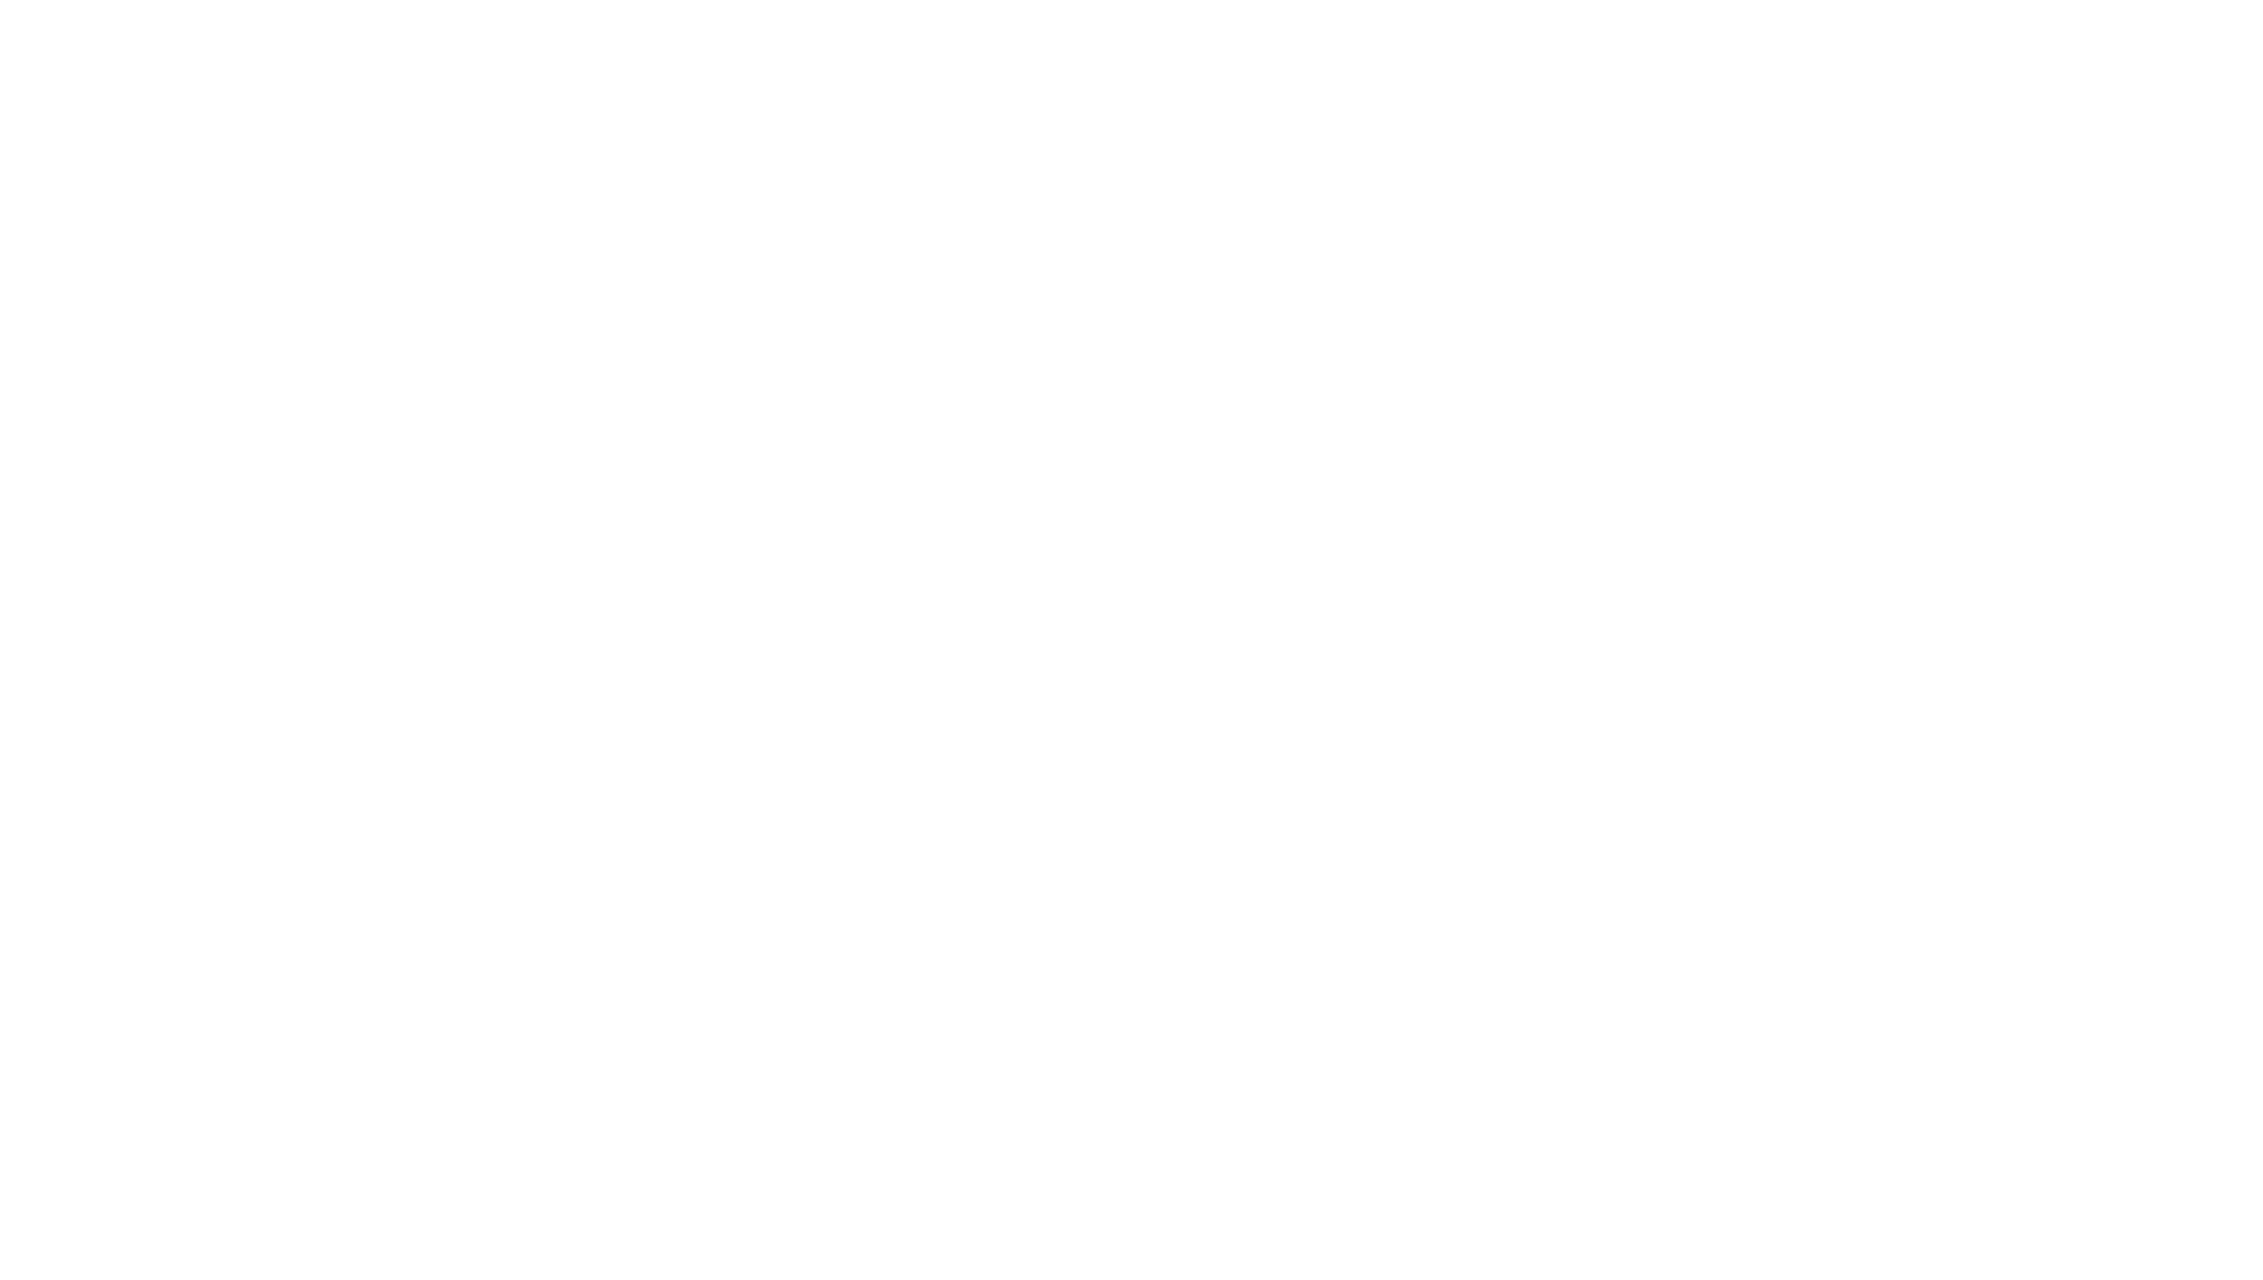 Maggie Simpson in "The Force Awakens from Its Nap" logo